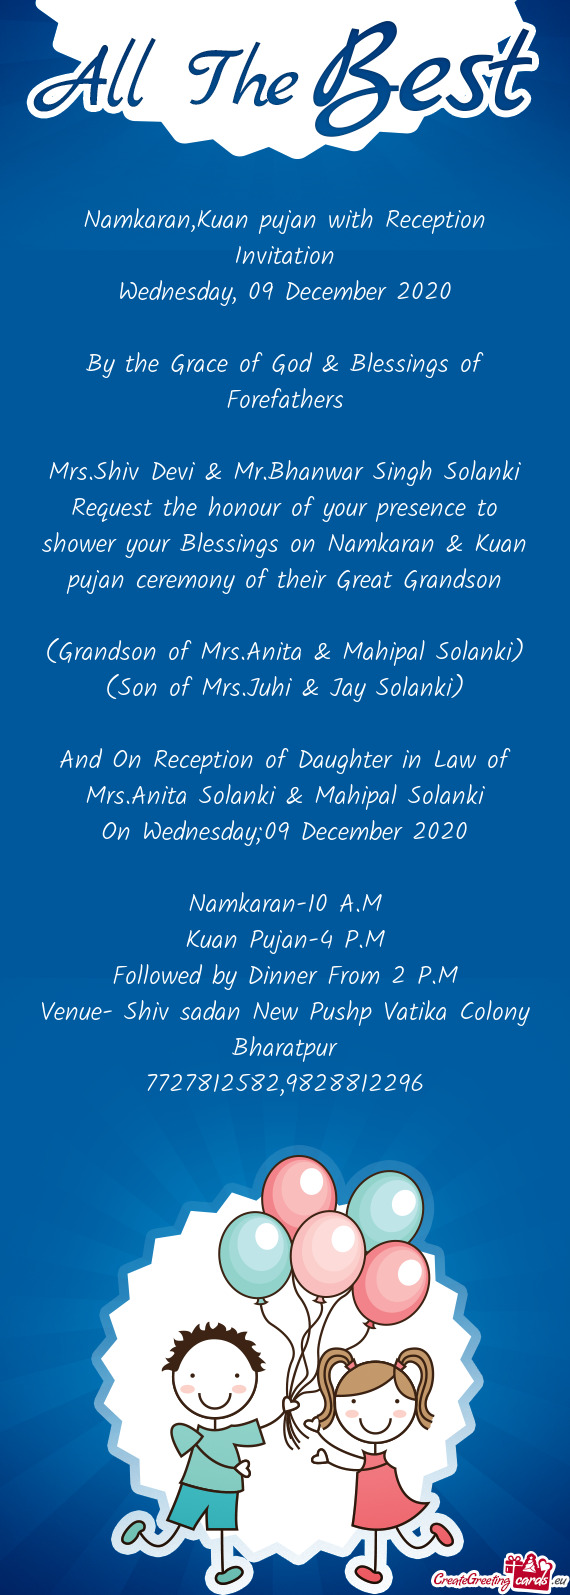 Request the honour of your presence to shower your Blessings on Namkaran & Kuan pujan ceremony of th